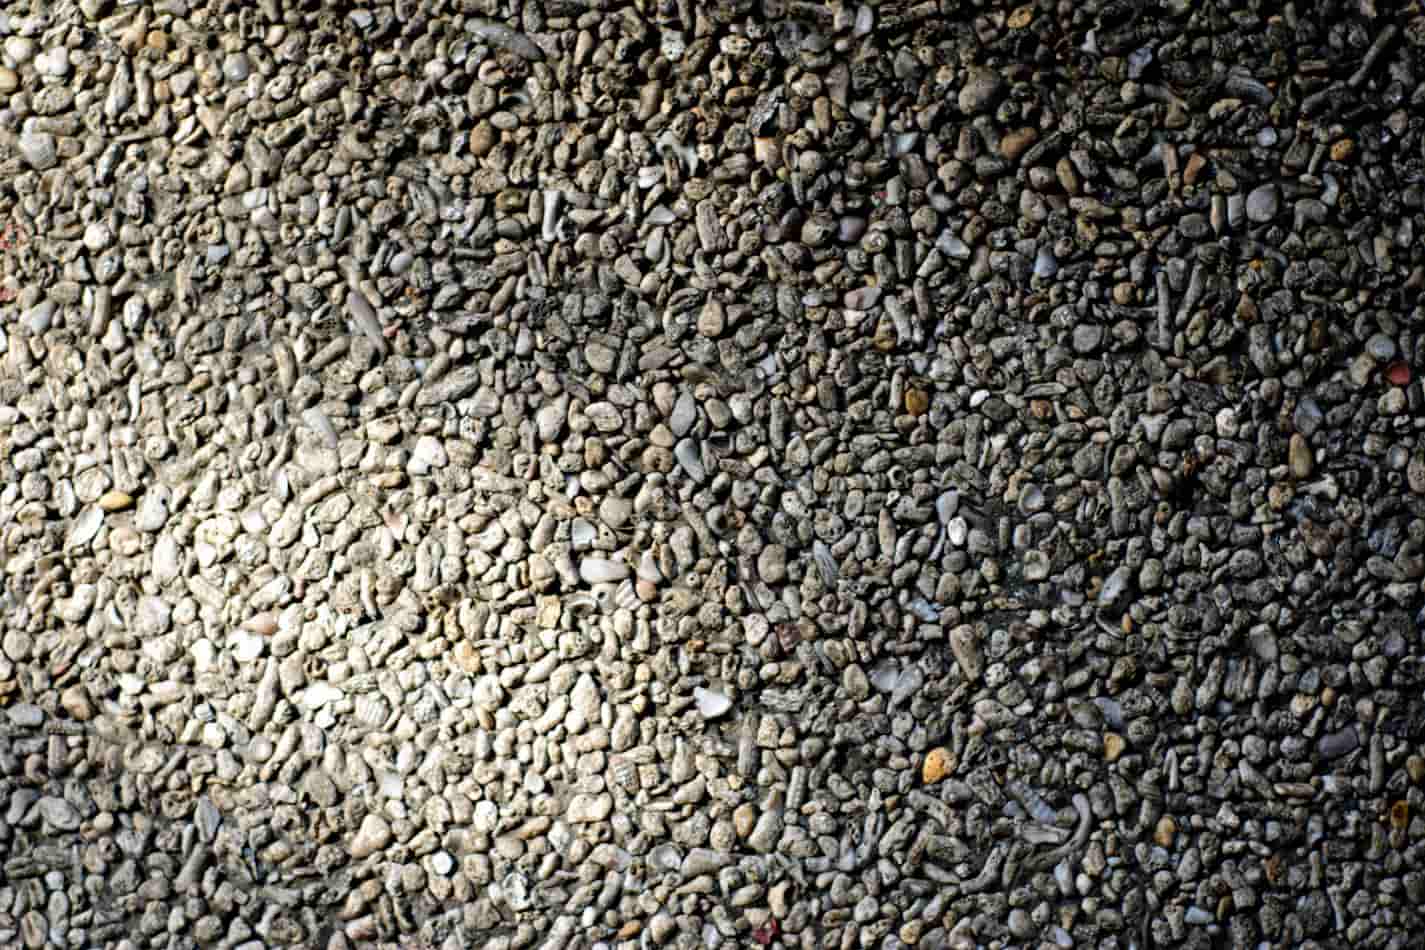 Pool Finish: Why You Should Add a Pebble Finish